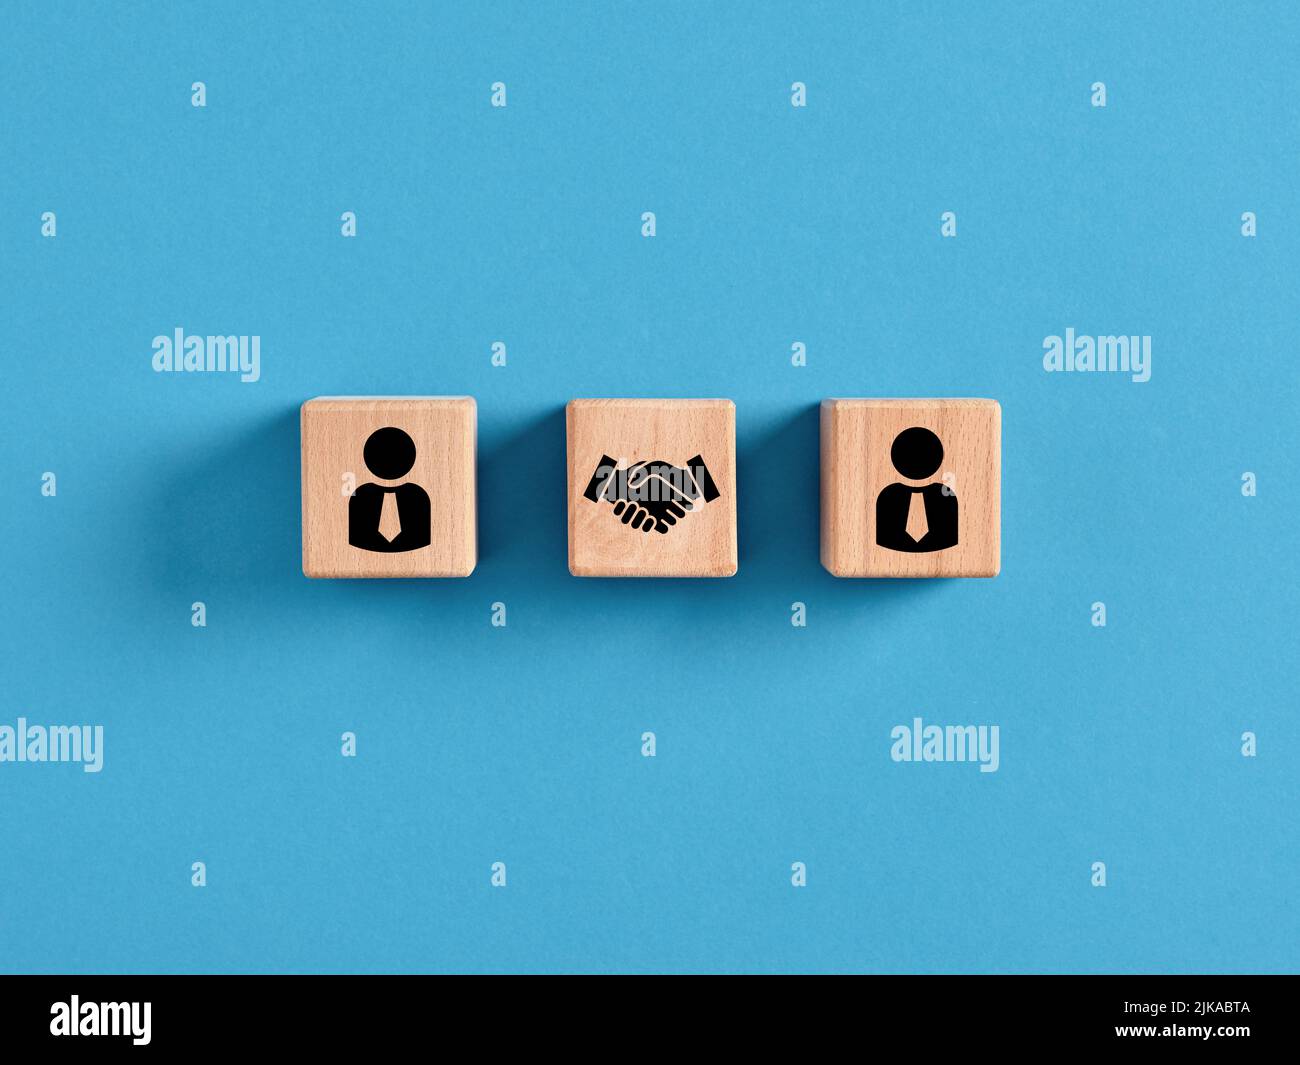 Business deal, agreement or contract concept. Employee manager and handshake icons on wooden cubes Stock Photo